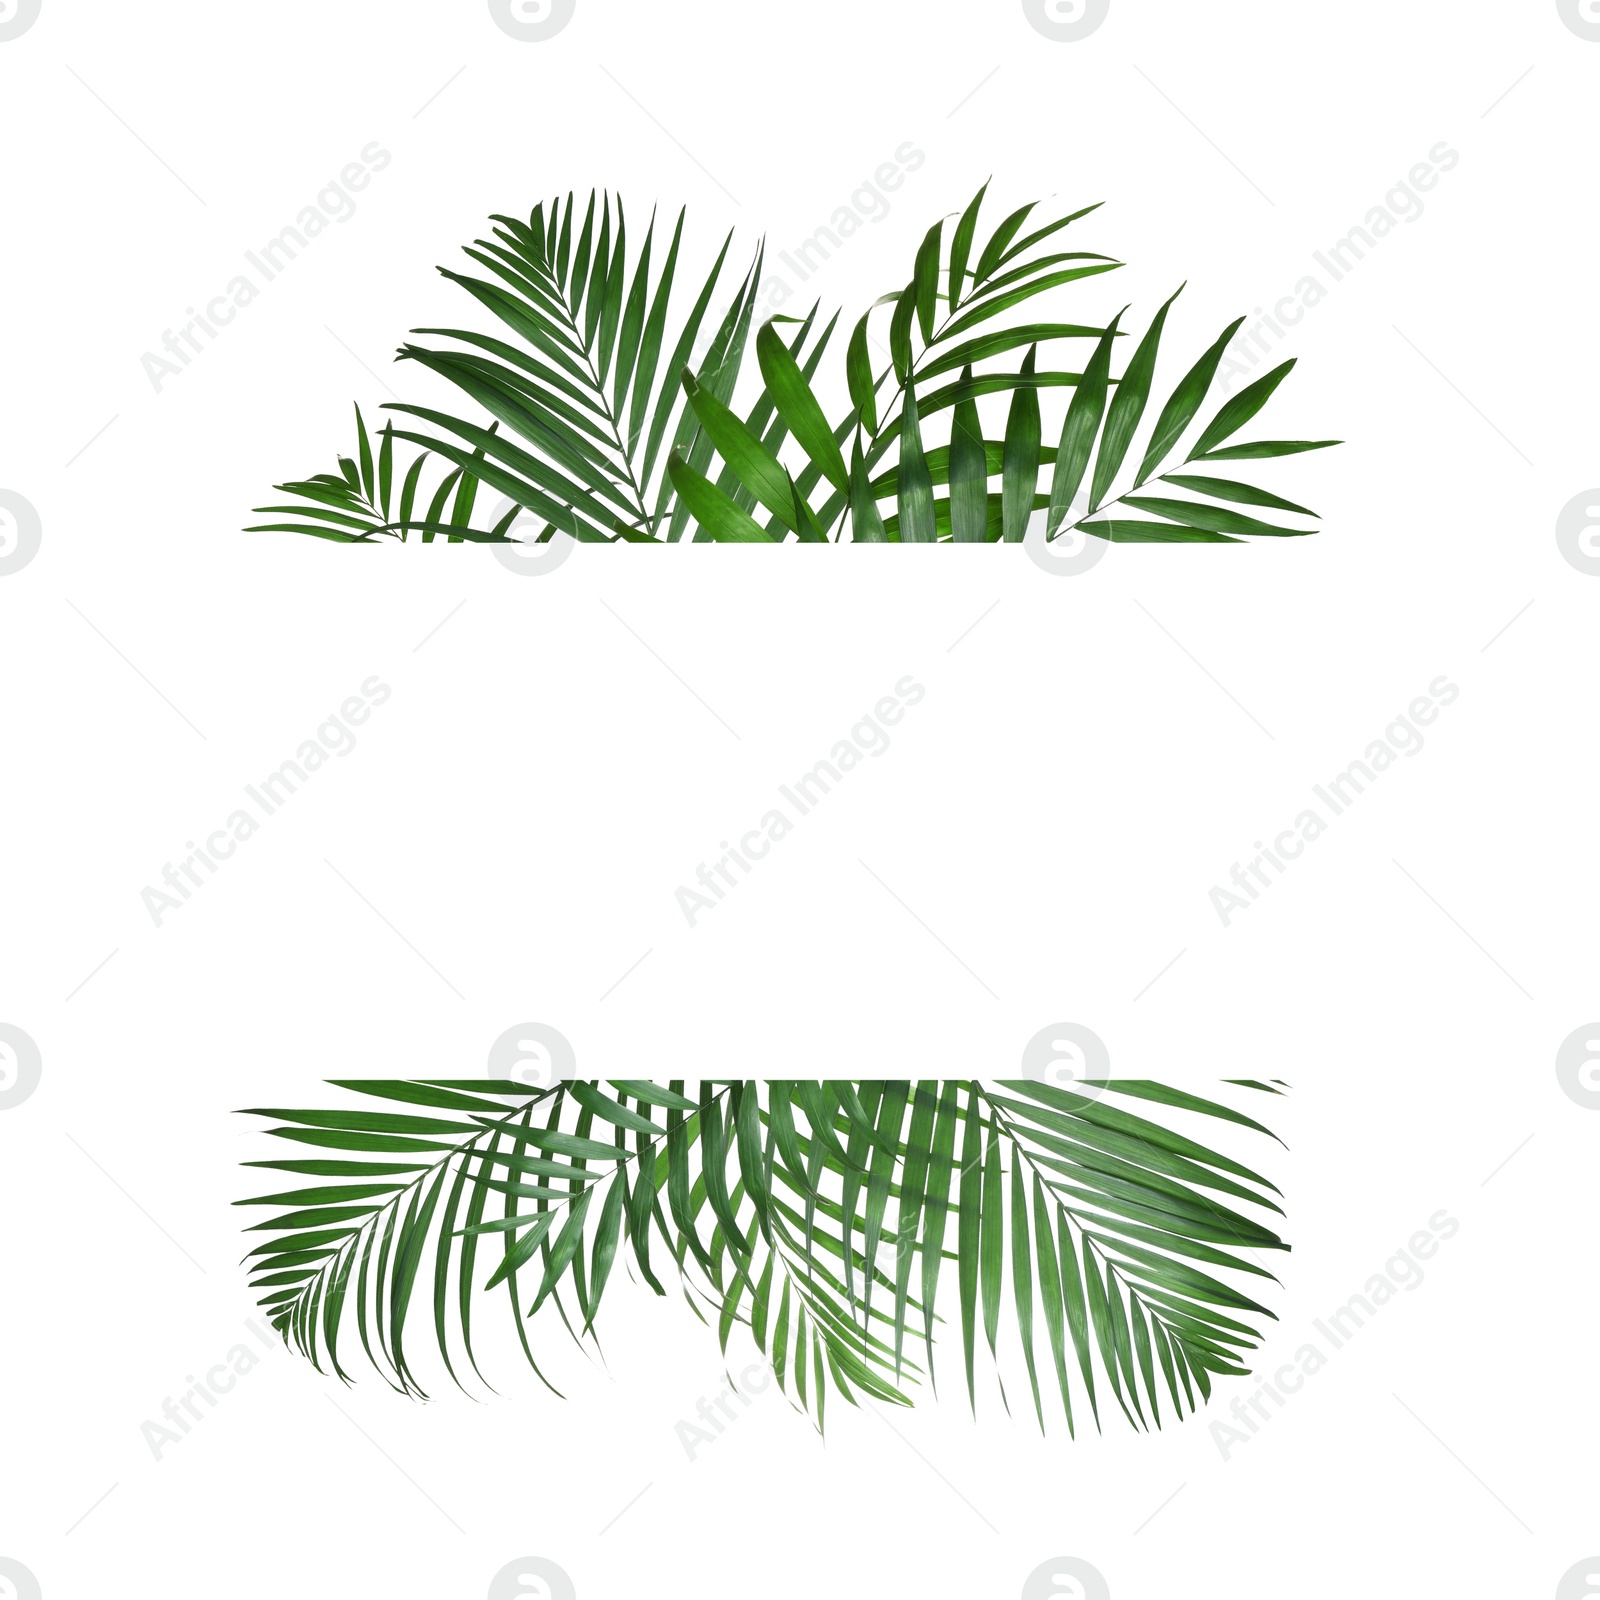 Image of Frame made of beautiful lush tropical leaves on white background, top view. Space for text